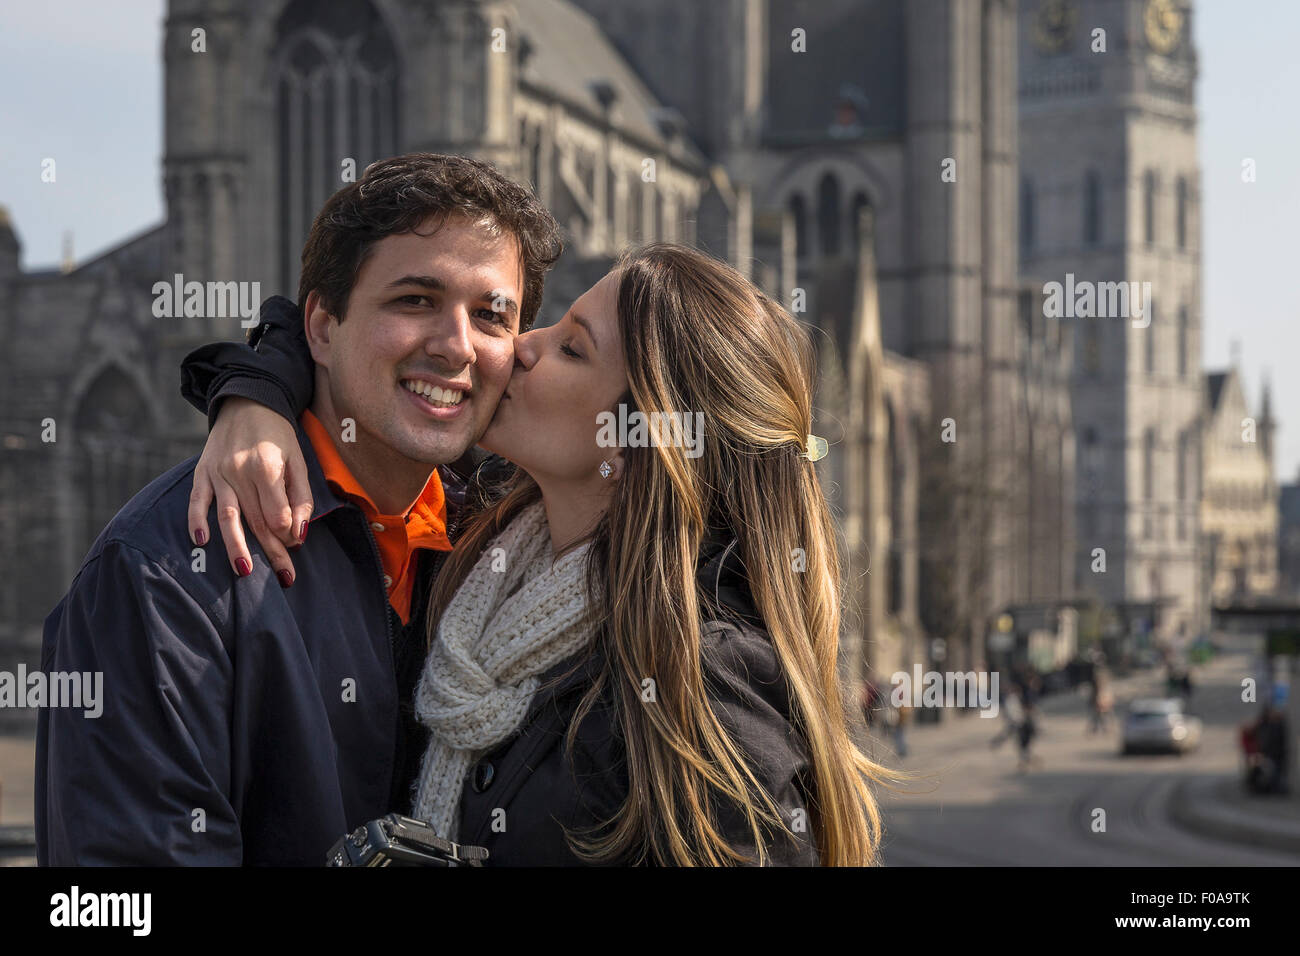 Romantic couple in front of St Bavo's Cathedral, Ghent, Flanders, Belgium Stock Photo